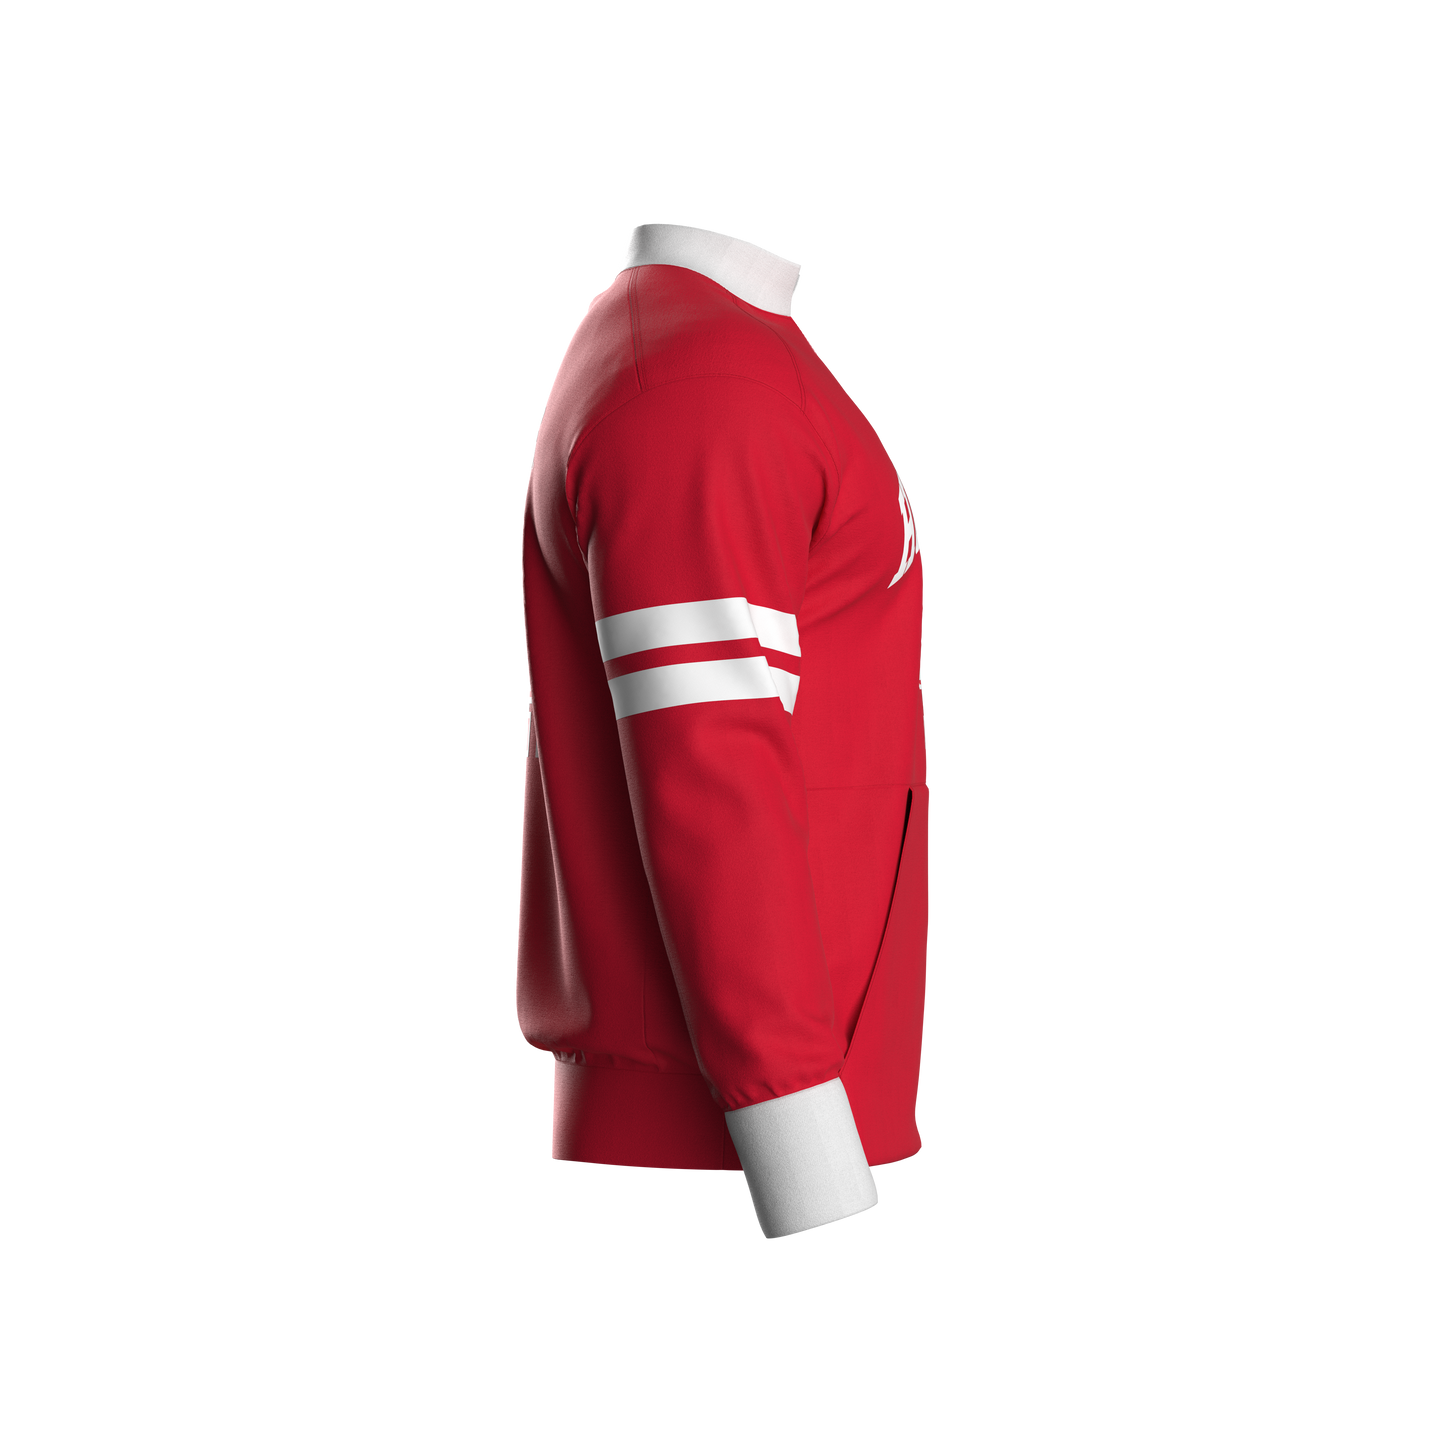 University of Houston Home Pullover (youth)